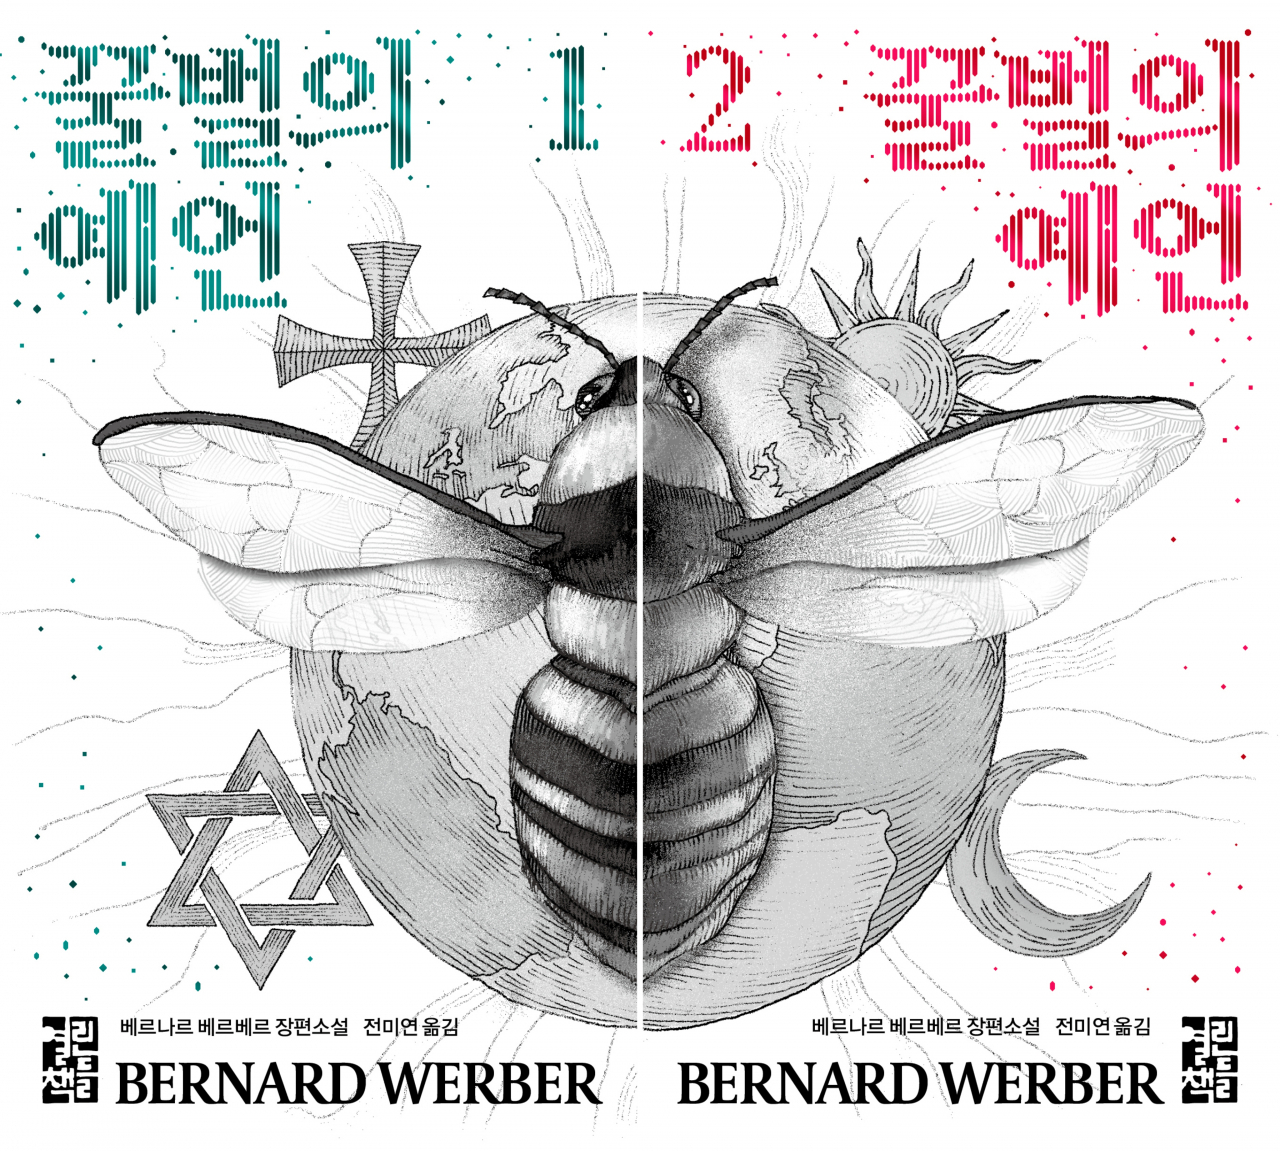 The Korean edition of 